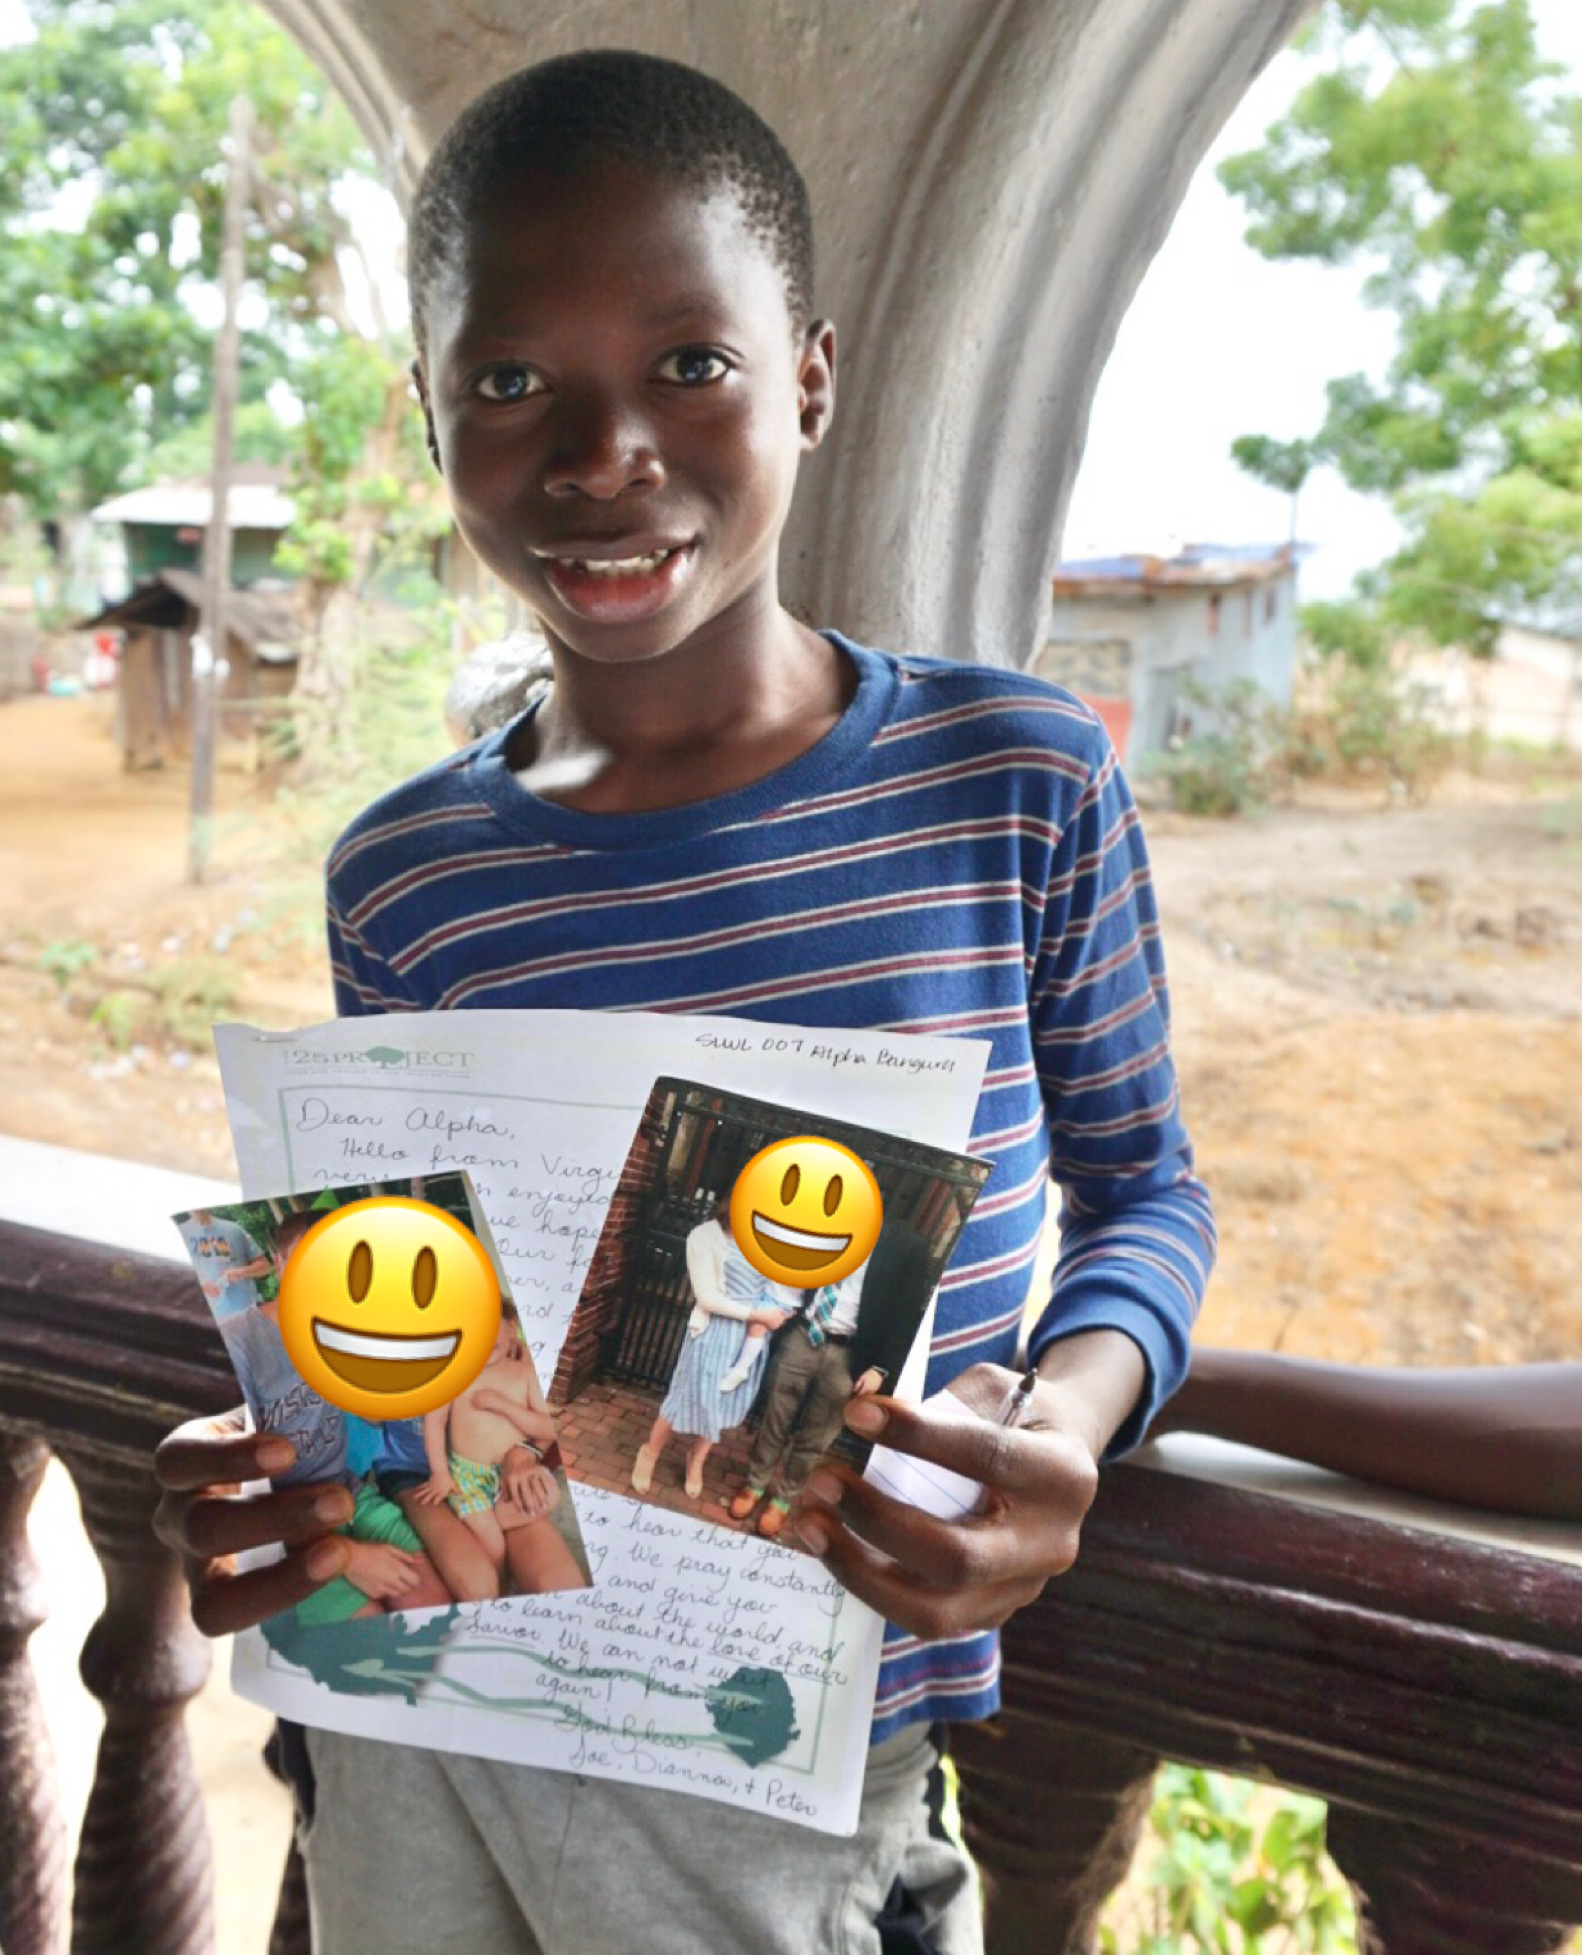 Alpha in Sierra Leone excited about the letter and pictures his sponsors sent.